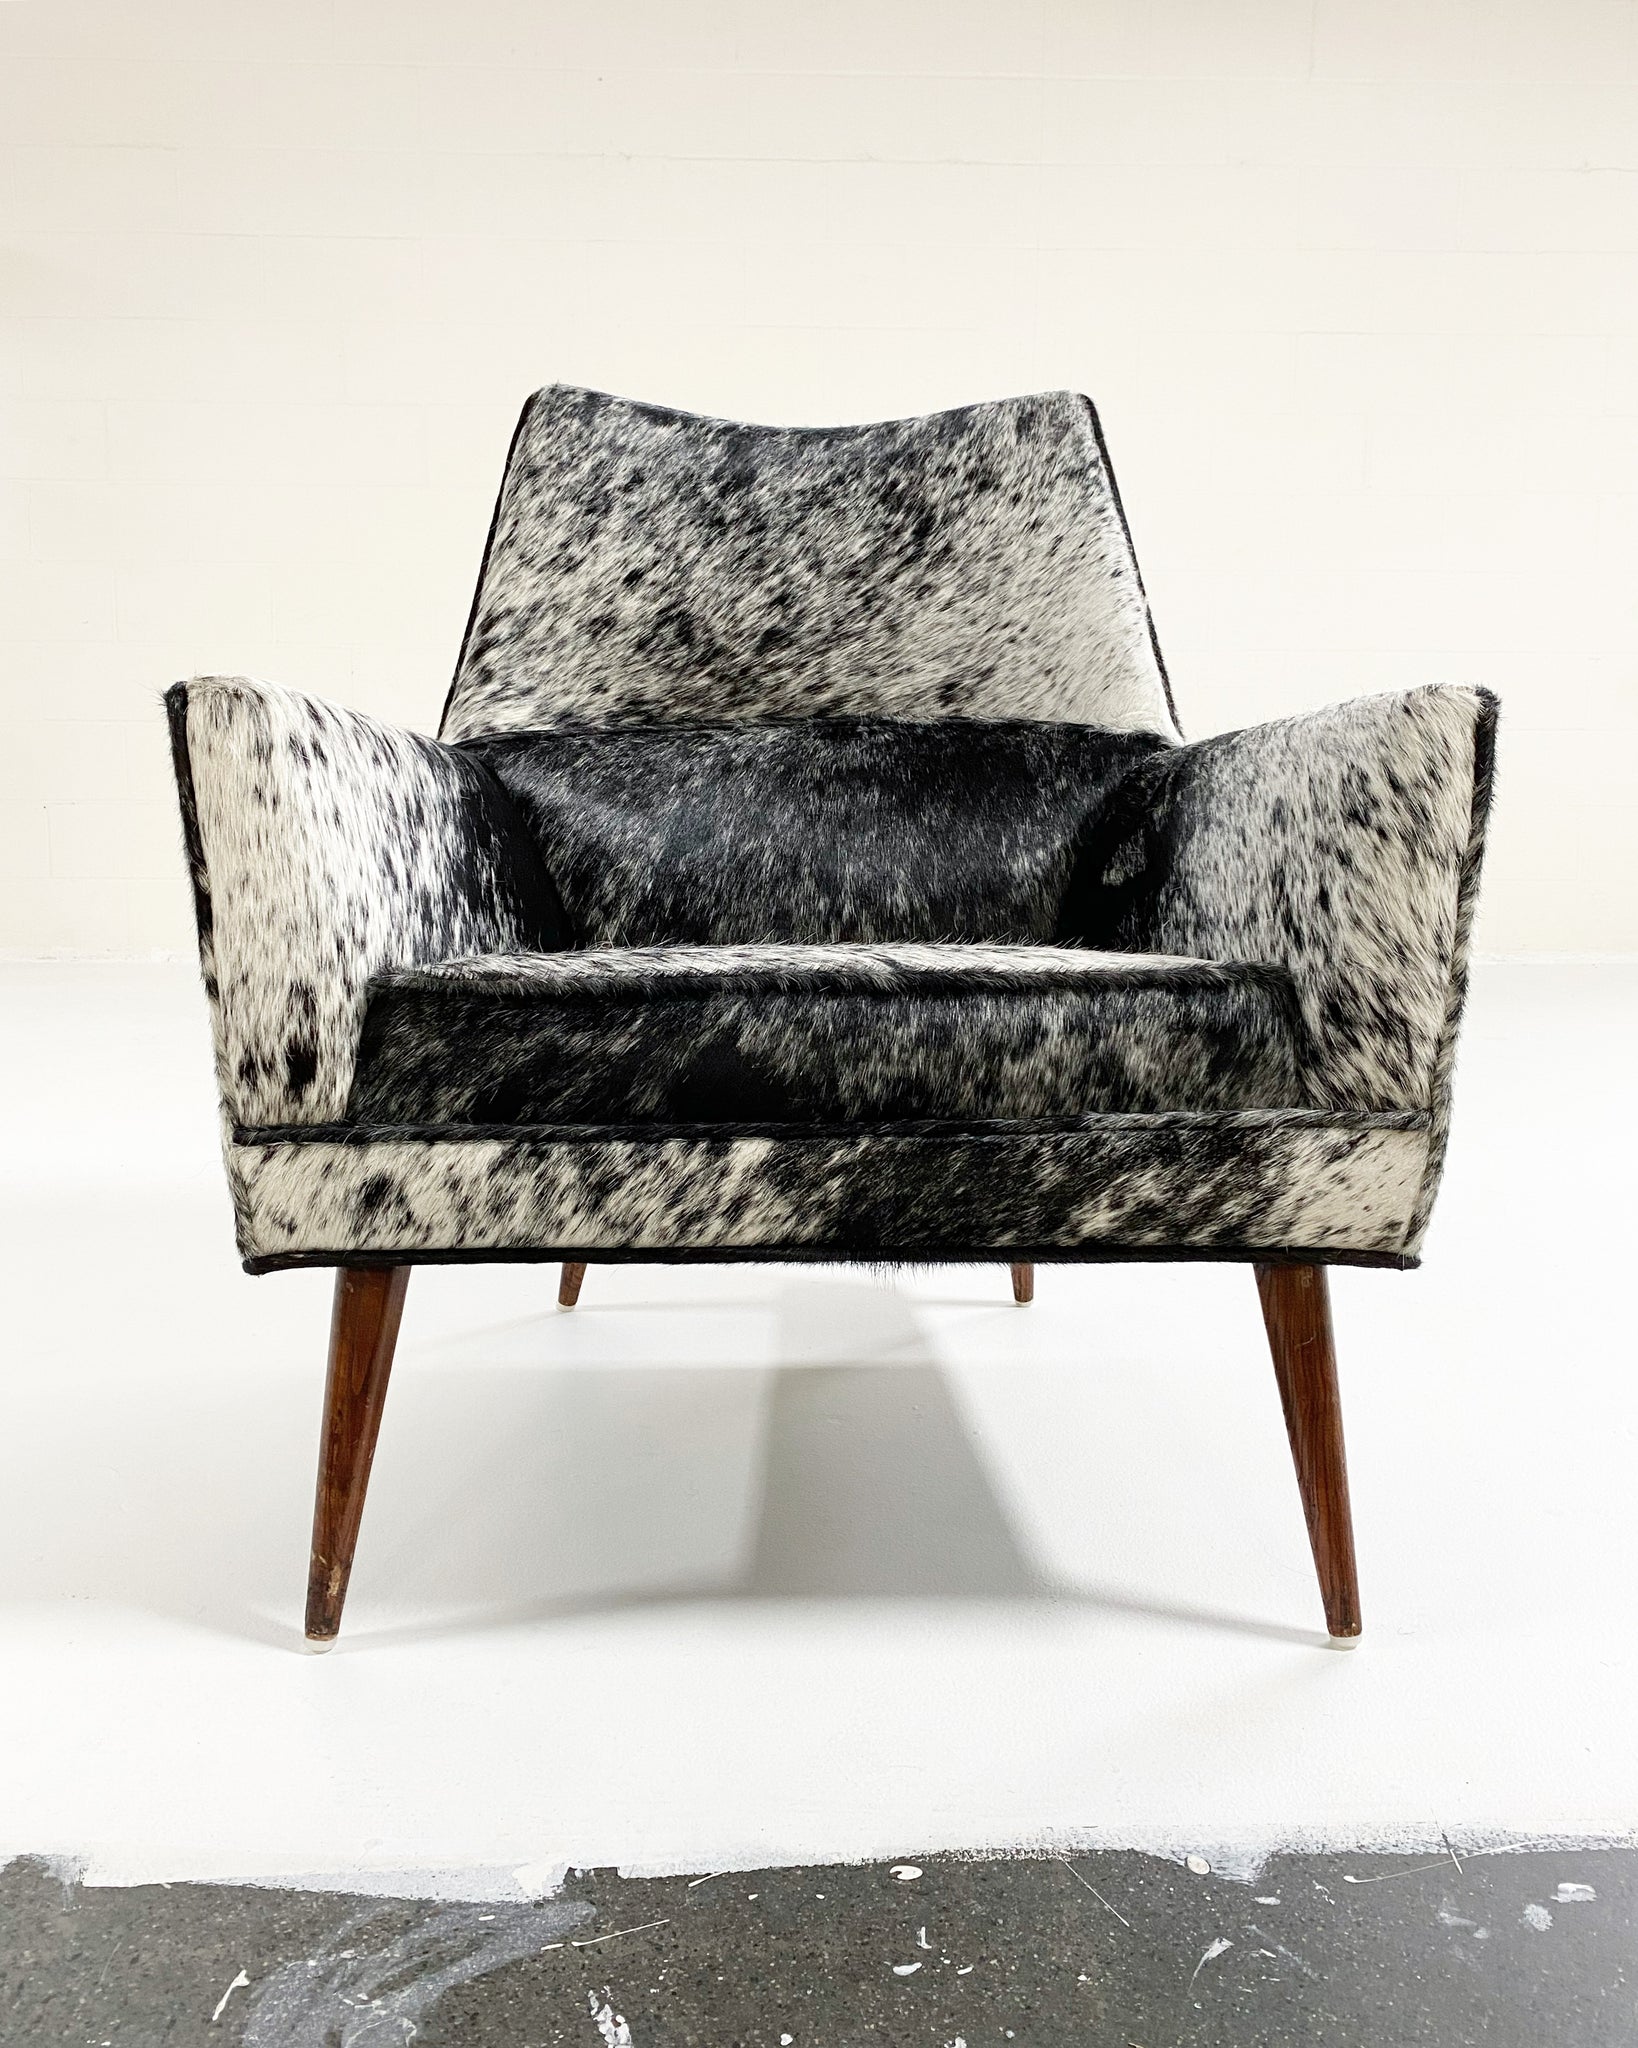 Model 3042 "Squirm" Lounge Chair in Brazilian Cowhide